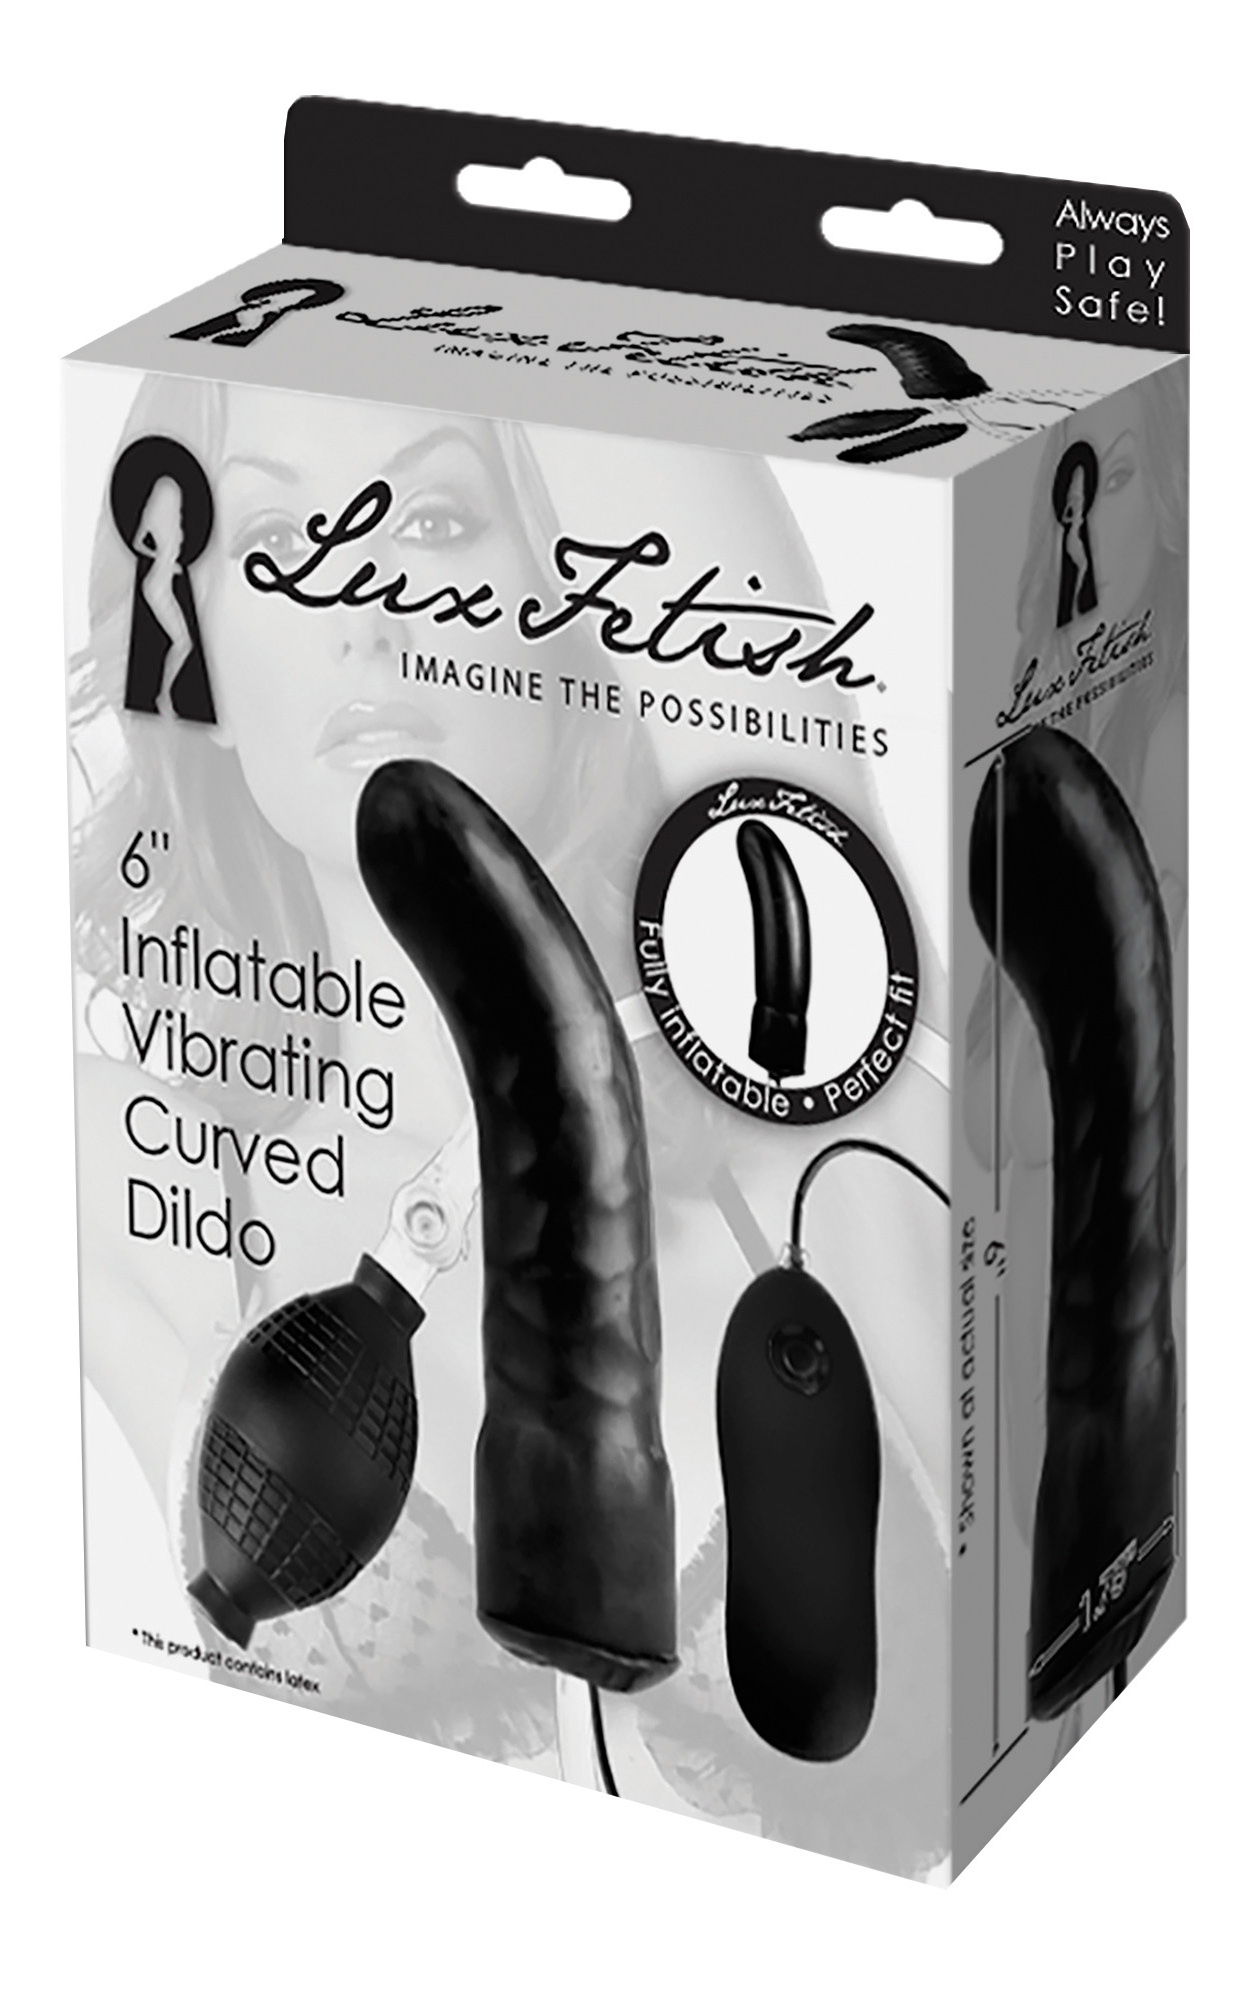 LUX FETISH 6" Inflatbale Vibrating Curved Dildo